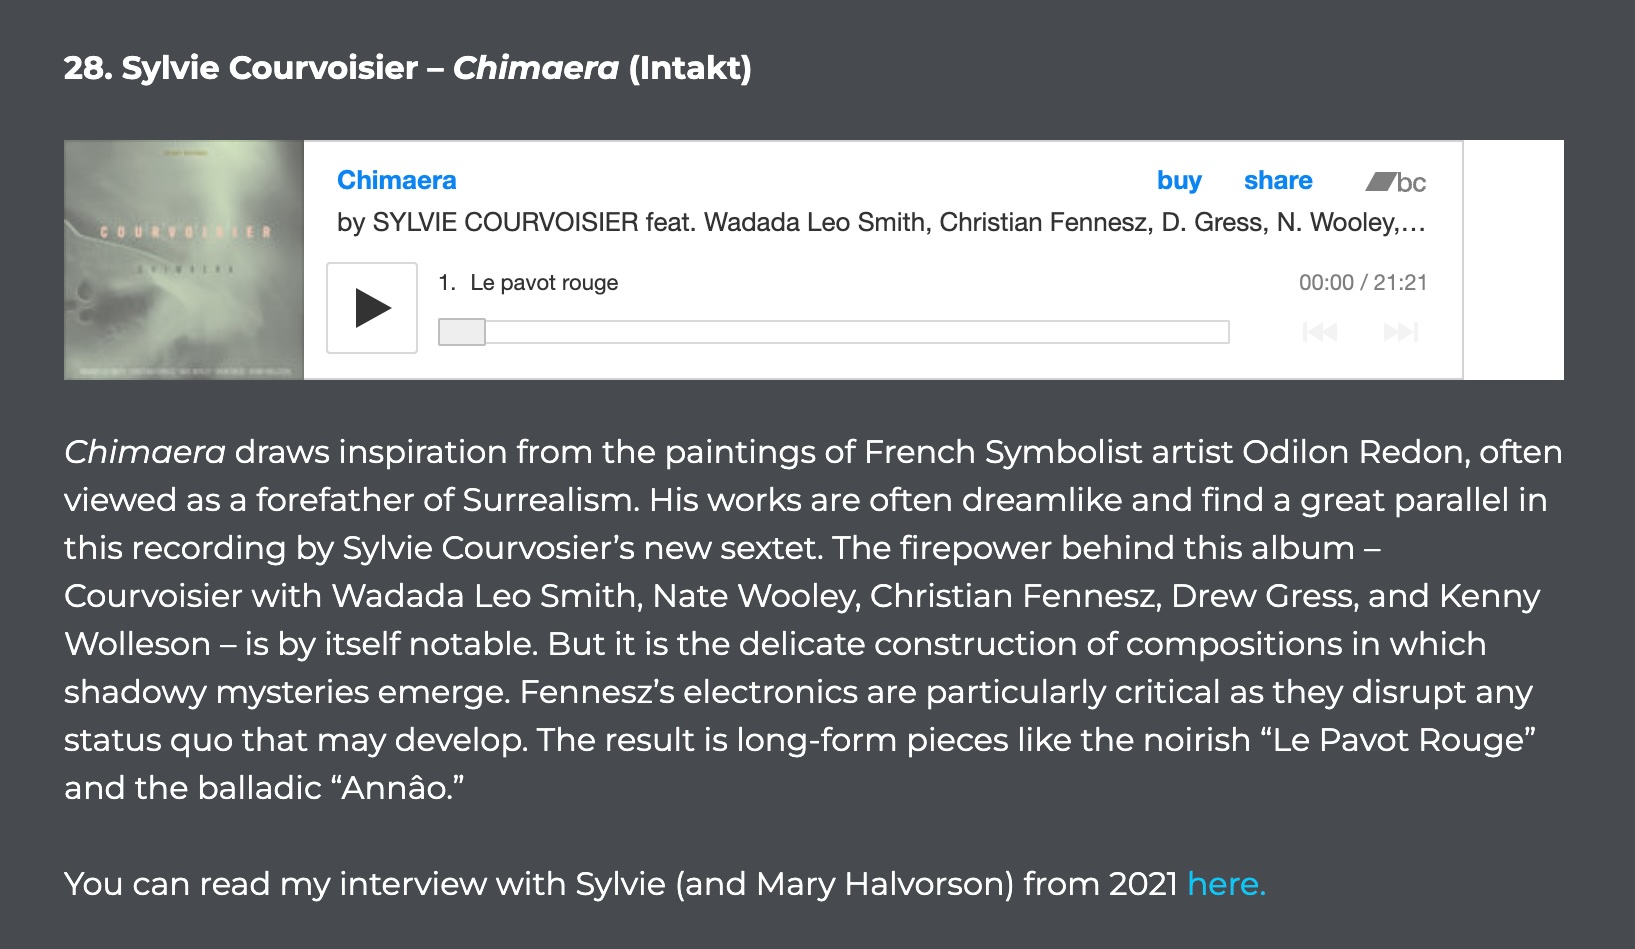 Chimaera draws inspiration from the paintings of French Symbolist artist Odilon Redon, often viewed as a forefather of Surrealism. His works are often dreamlike and find a great parallel in this recording by Sylvie Courvosier’s new sextet. The firepower behind this album – Courvoisier with Wadada Leo Smith, Nate Wooley, Christian Fennesz, Drew Gress, and Kenny Wolleson – is by itself notable. But it is the delicate construction of compositions in which shadowy mysteries emerge. Fennesz’s electronics are particularly critical as they disrupt any status quo that may develop.